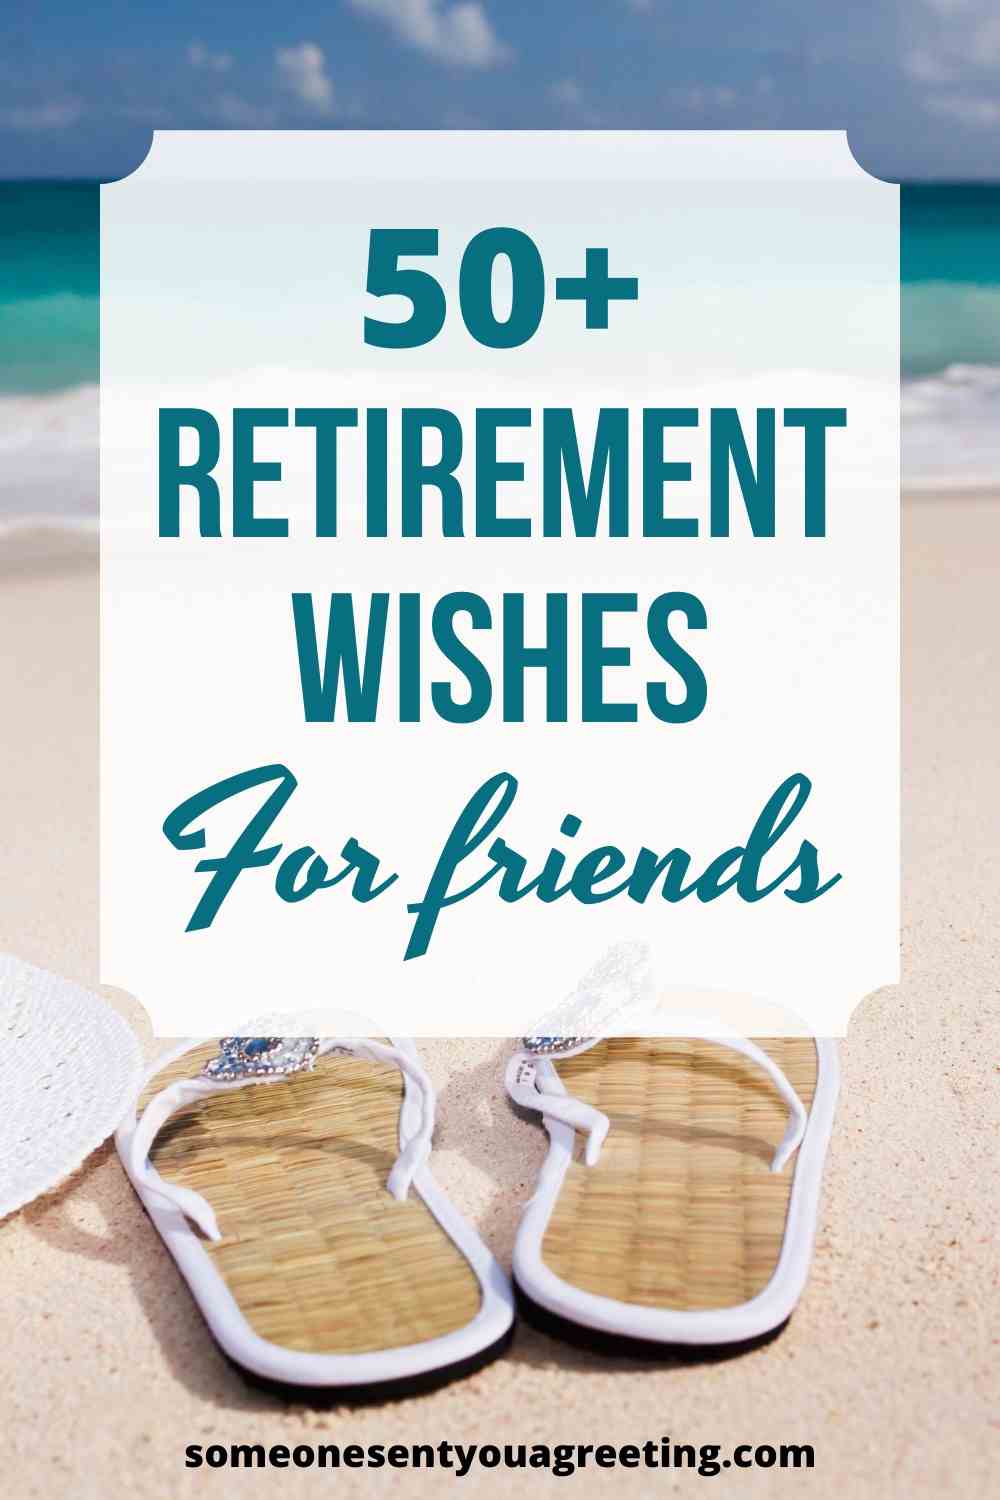 Retirement wishes for friends